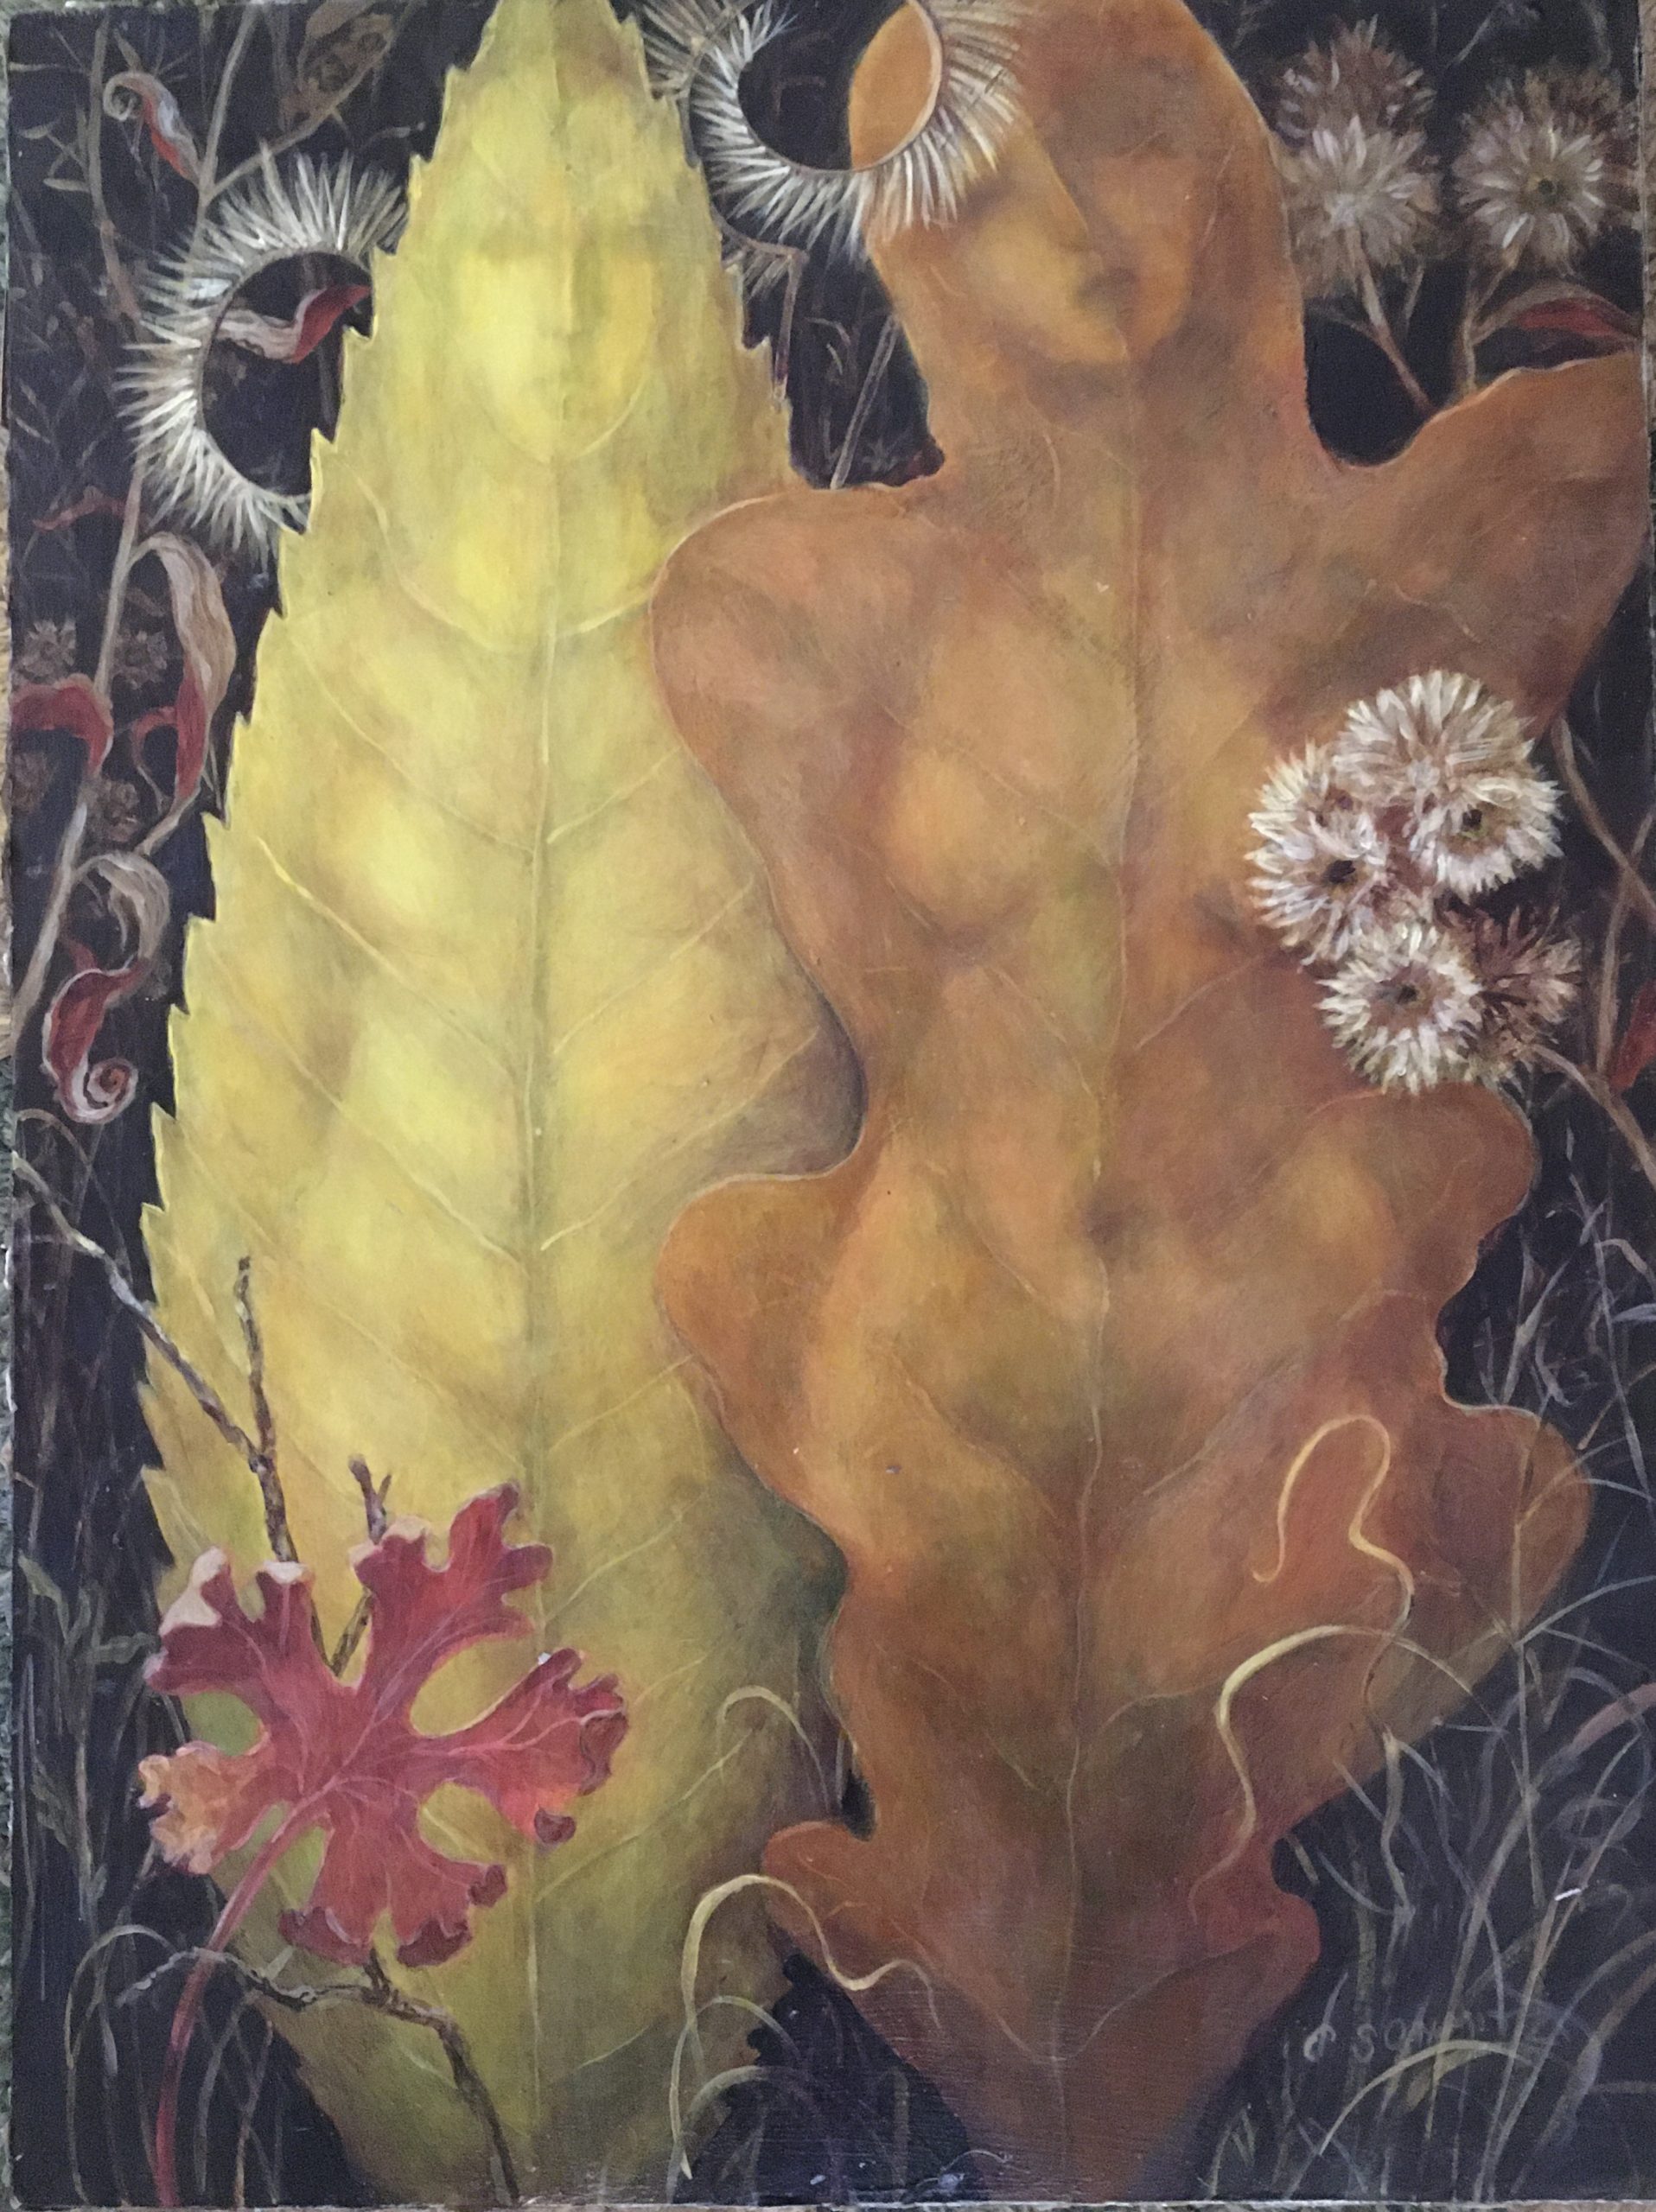 Image of a painting by Carolyn Schmitz depicting she and her sister, Linda, as forest flora. Carolyn is depicted as a black walnut leaf and Linda is depicted as a Gambel oak leaf. Around them are grama grass, Arizona cudweed, and a wild geranium leaf in autumn.